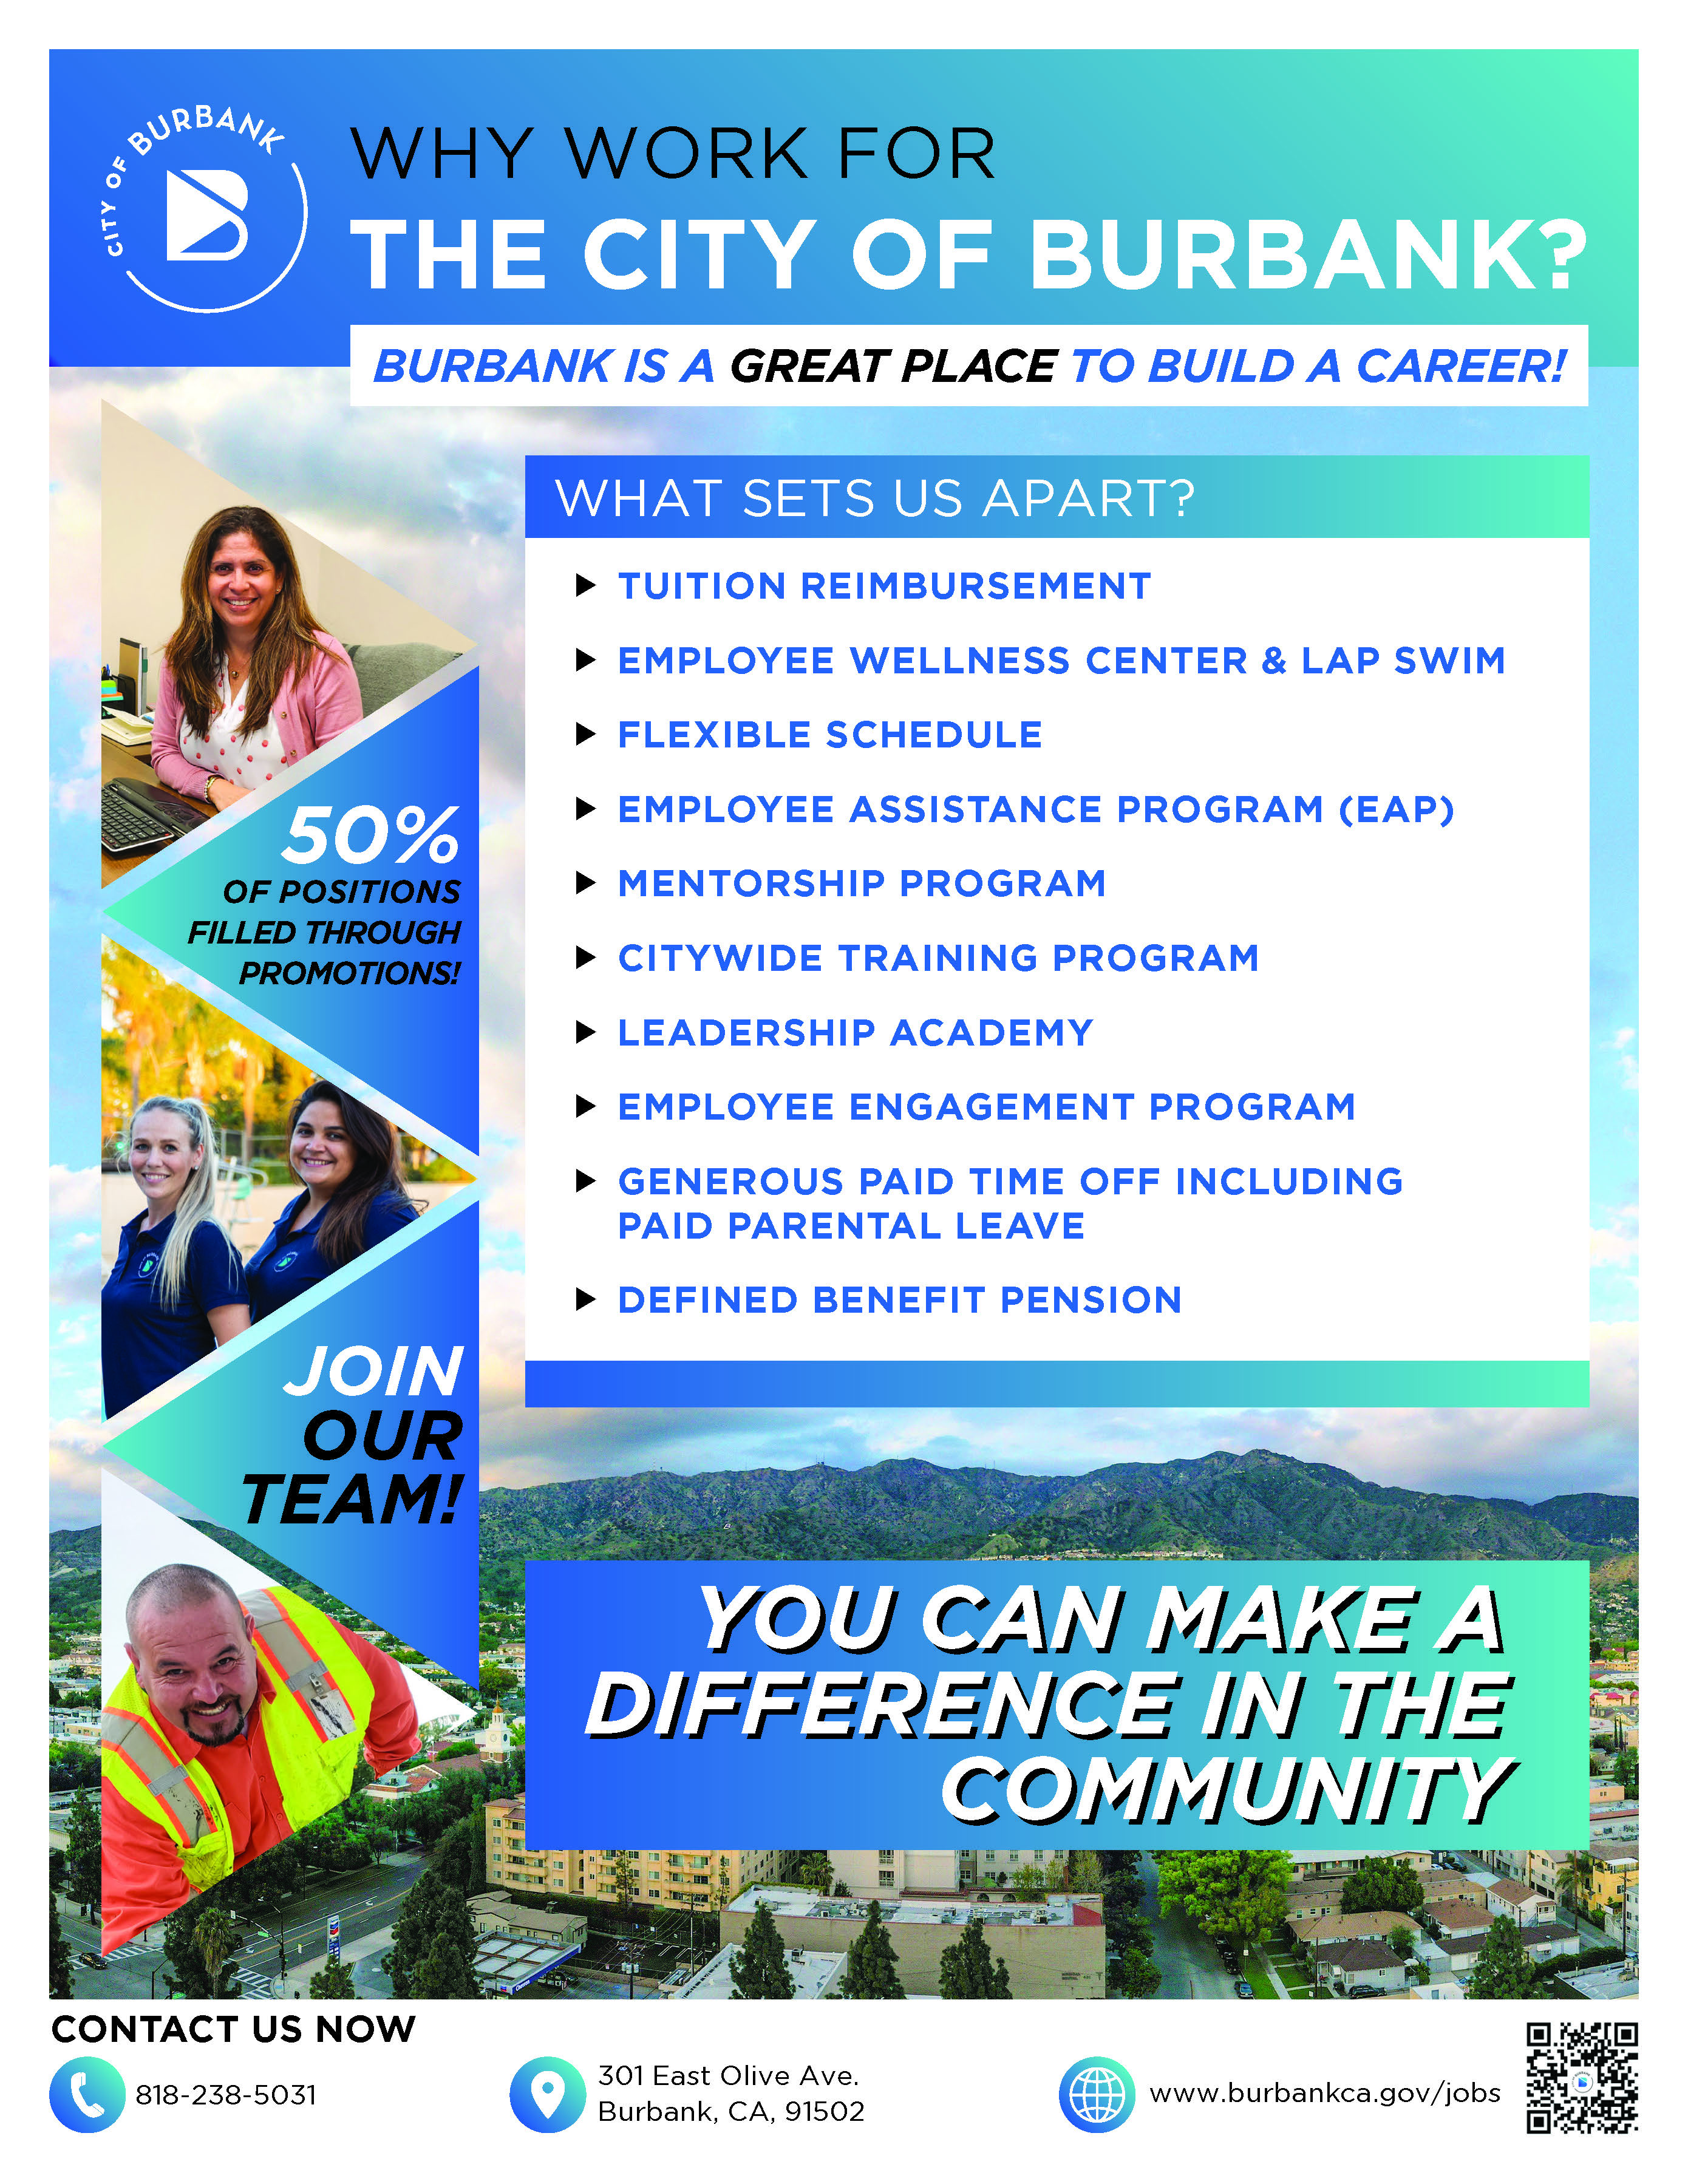 Burbank is a great place to build a career.